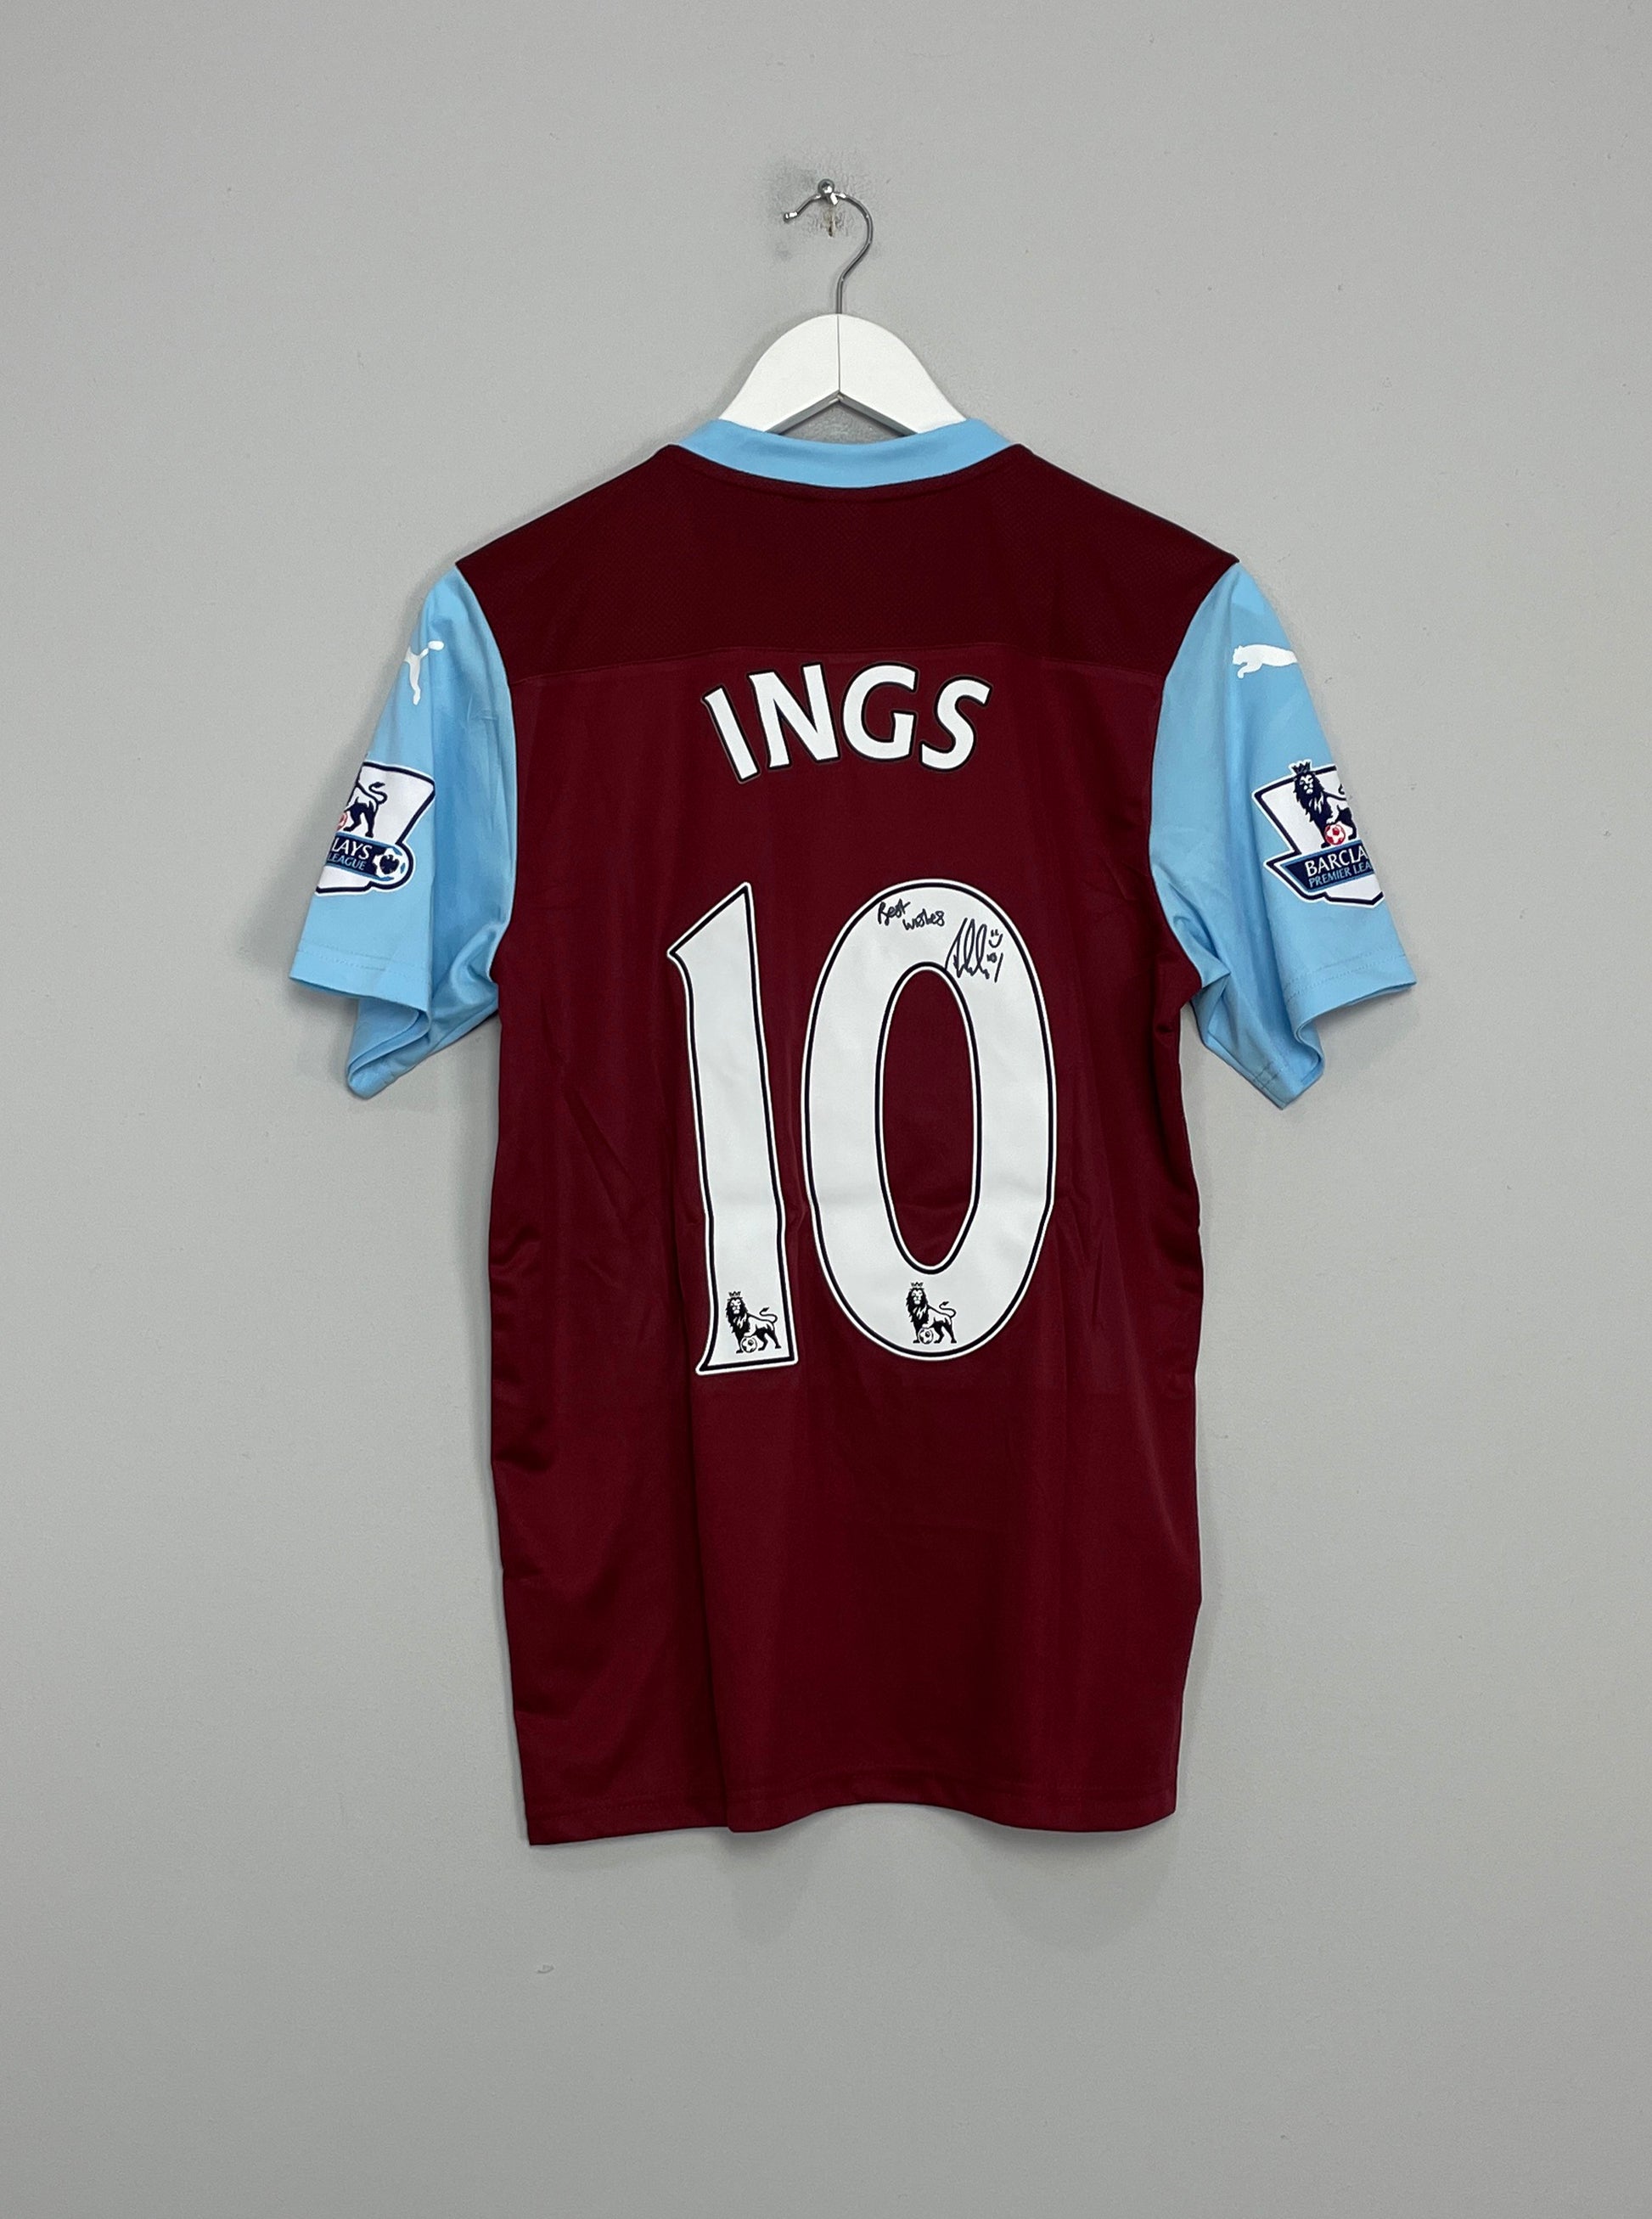 Image of Burnley Ings shirt from the 2014/15 season